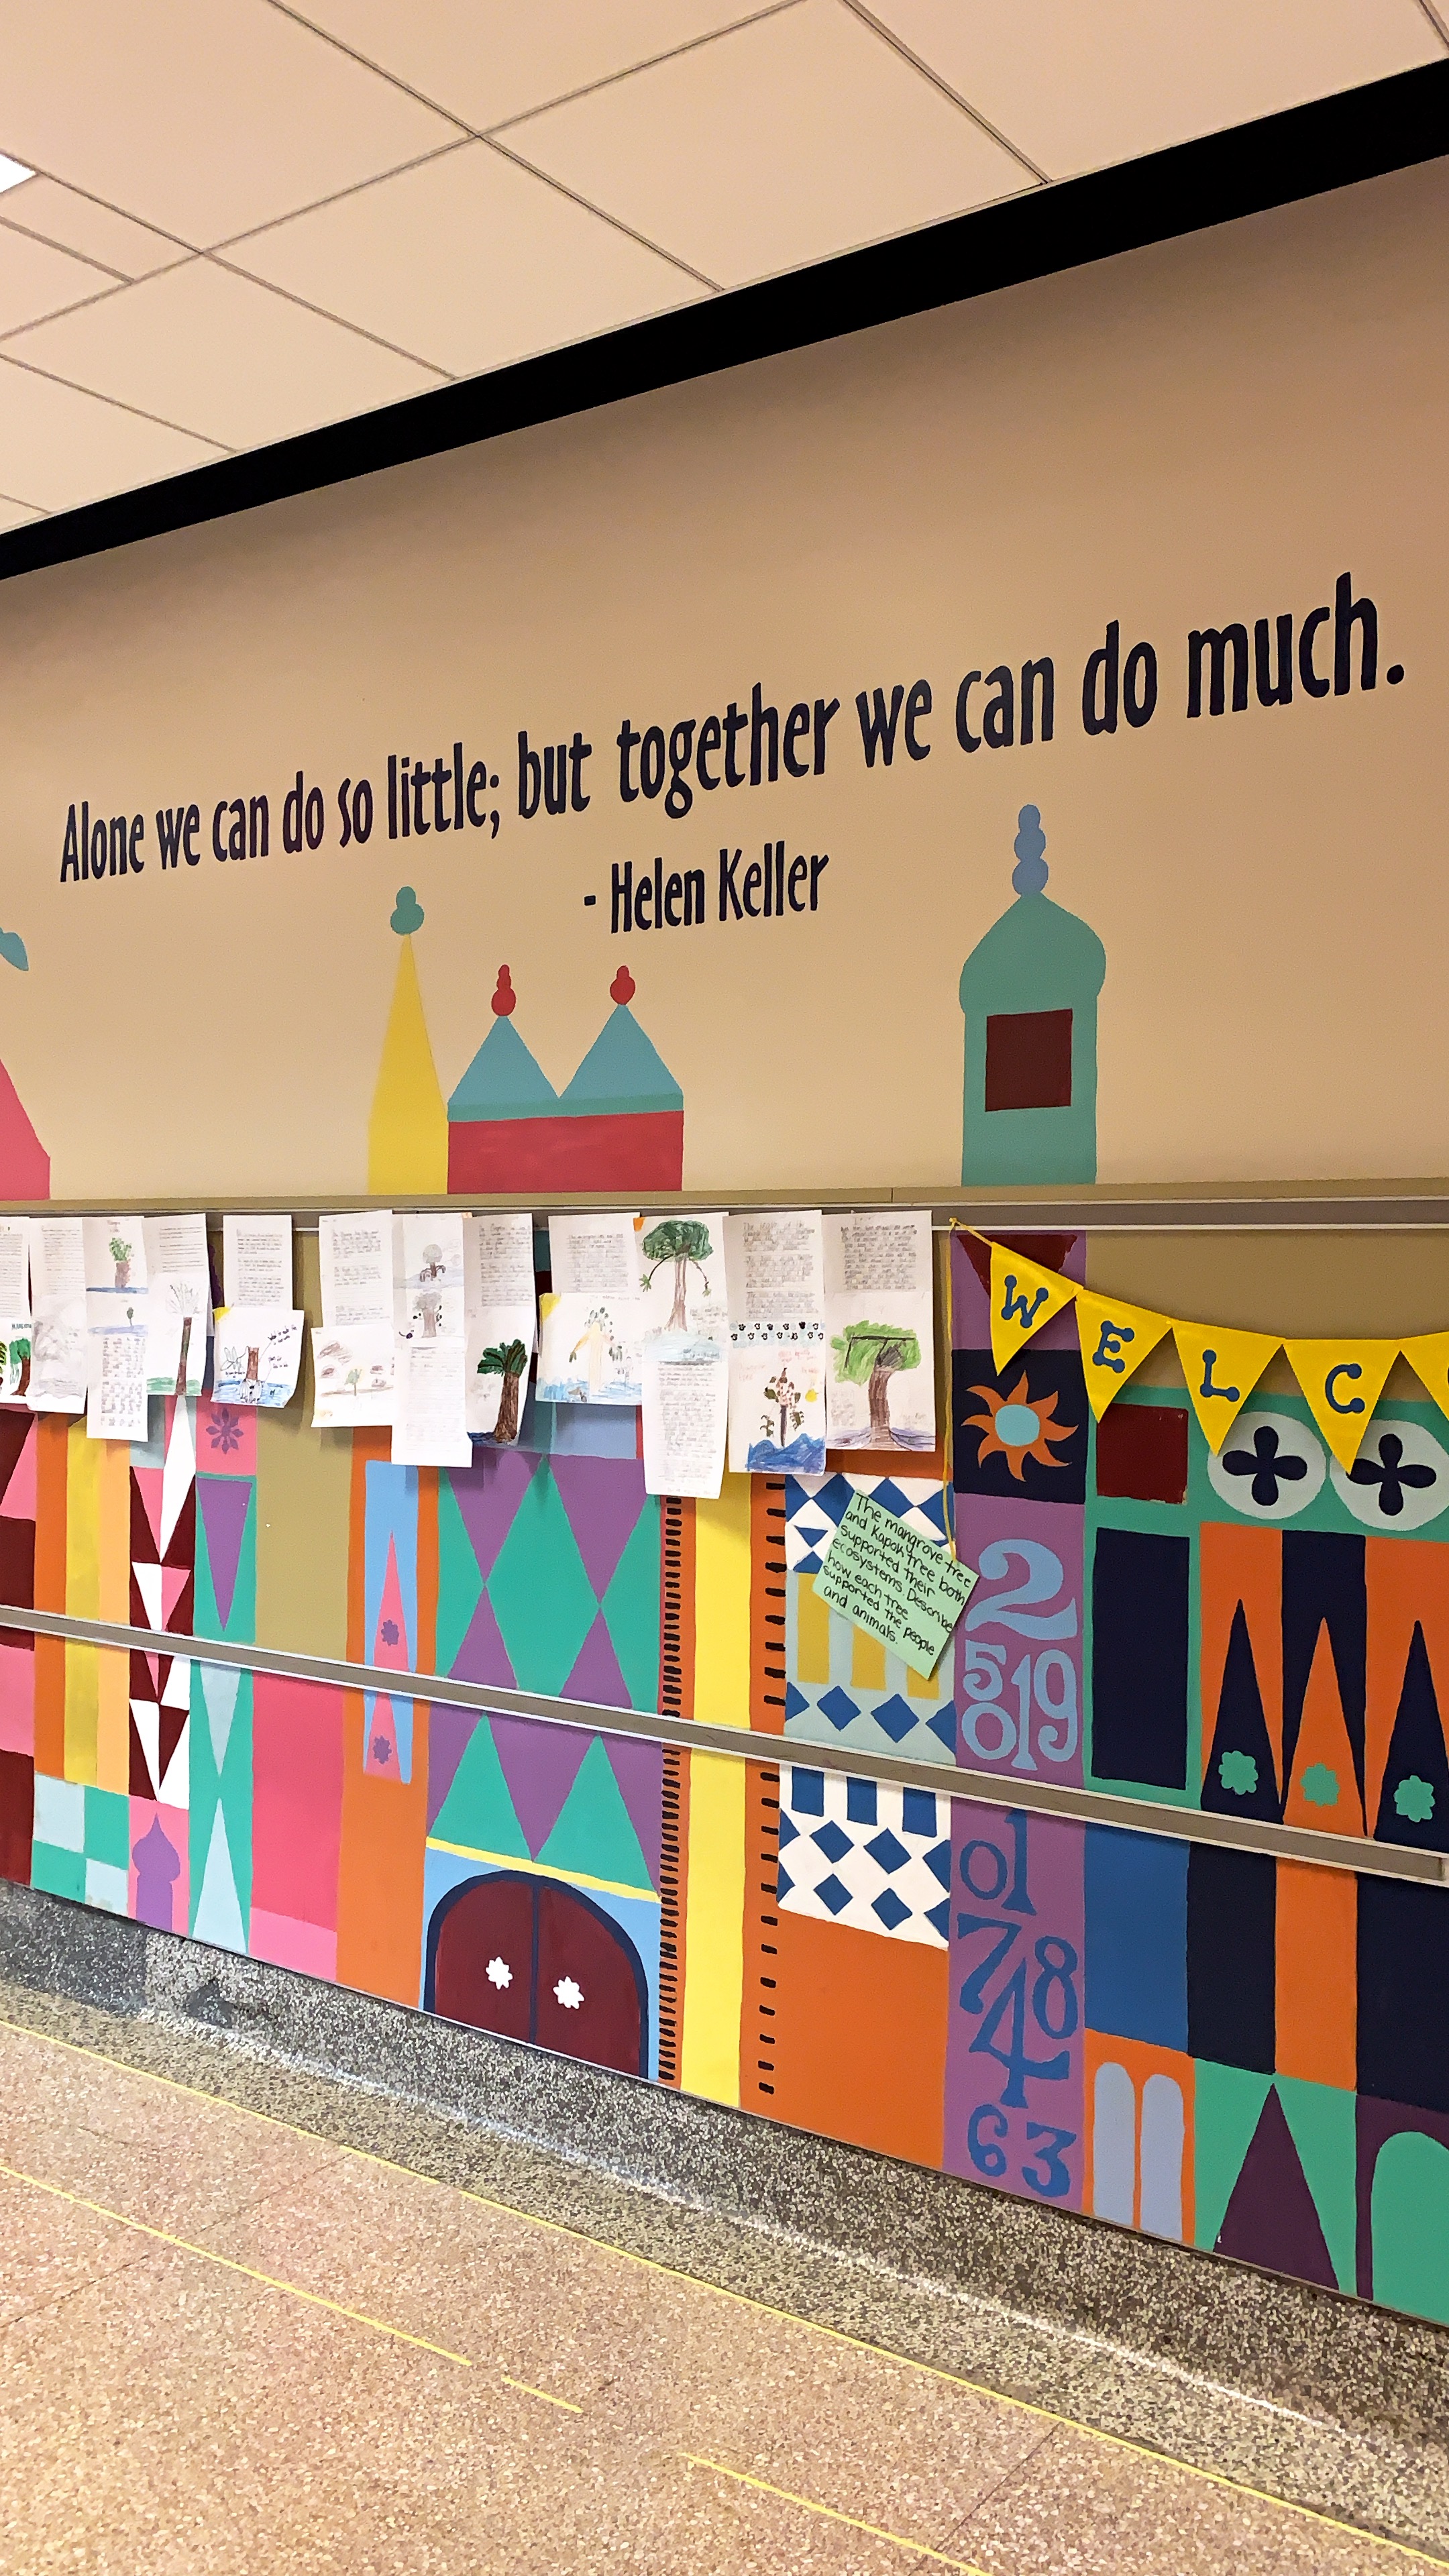 Mural on school wall. Paper cutouts in the shape of buildings below a quote by Helen Keller that says Alone we can do so little, but together we can do much.